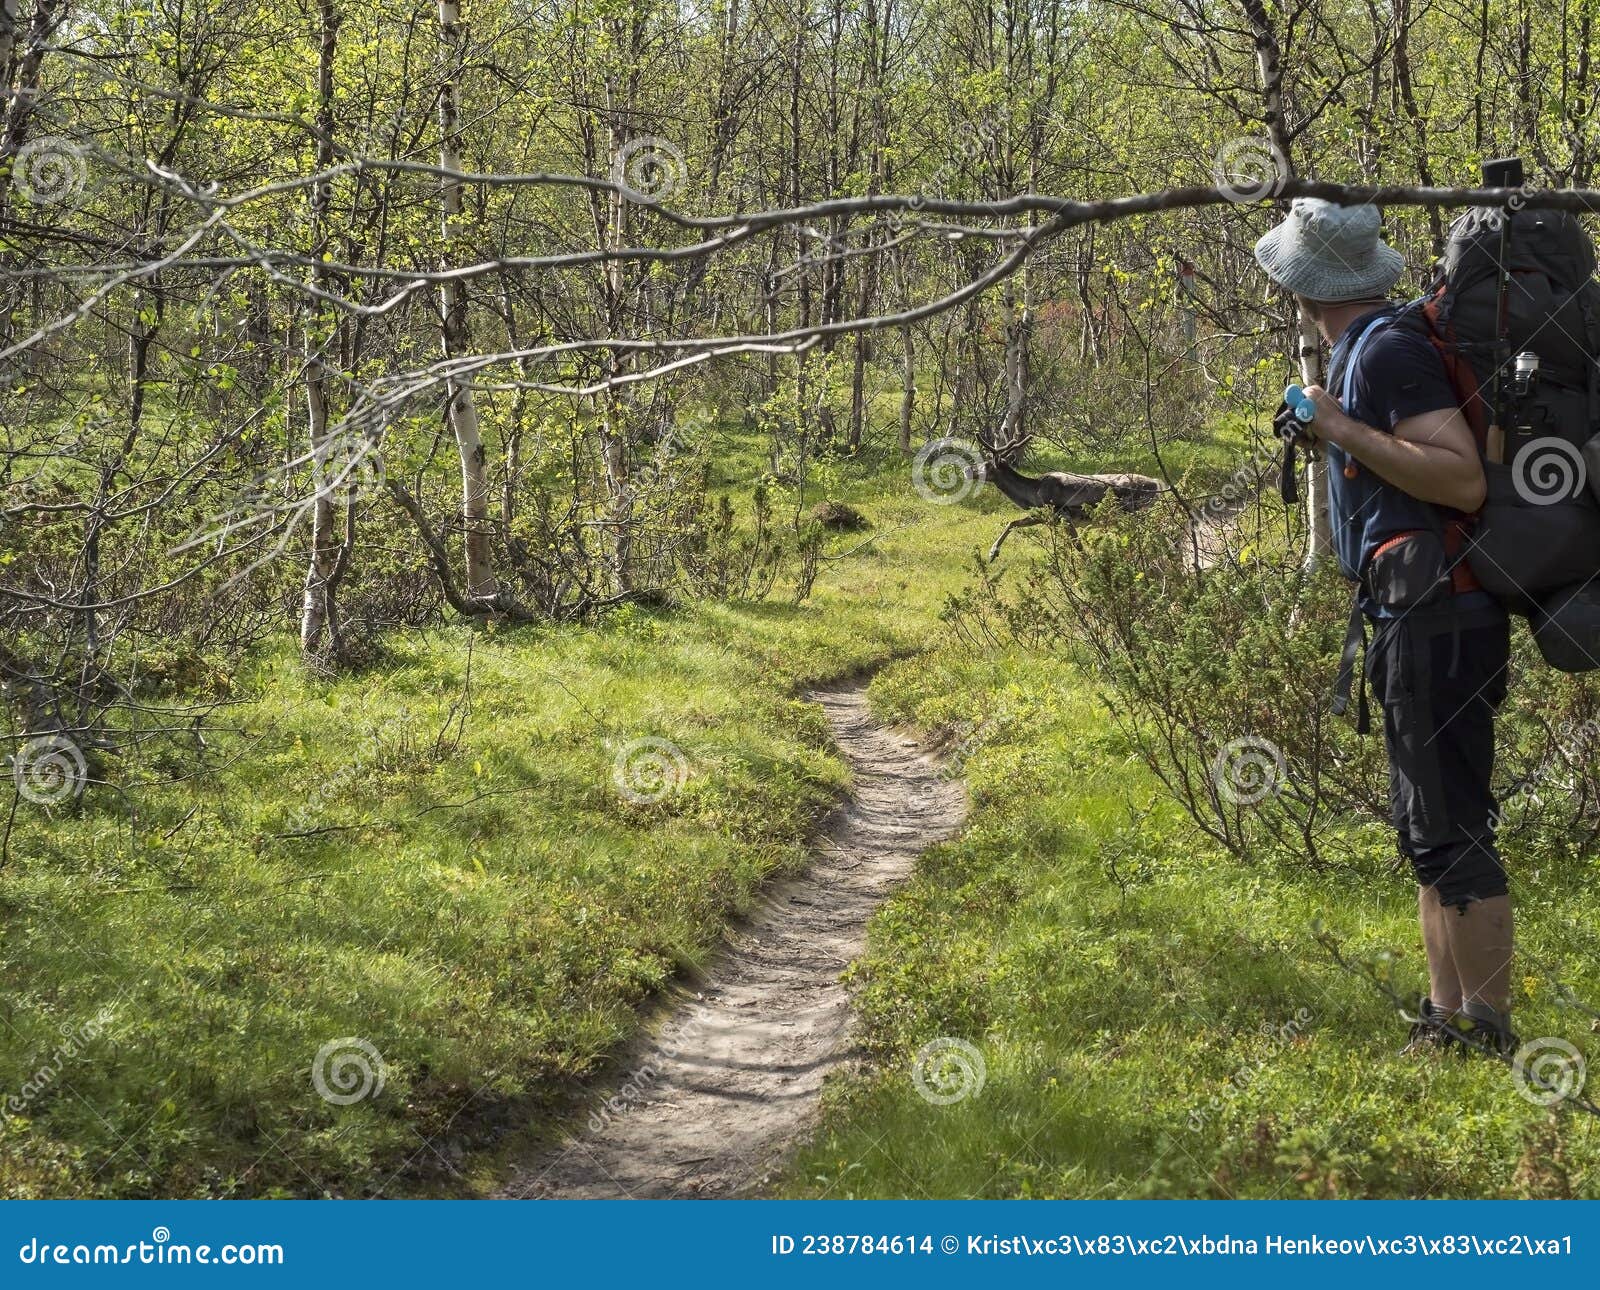 Man Hiker with Backpack and Fishing Rod Watching Reindeer Crossing the  Footpath at Hiking Trail in Birch Tree Forest at Editorial Stock Image -  Image of summer, spring: 238784614